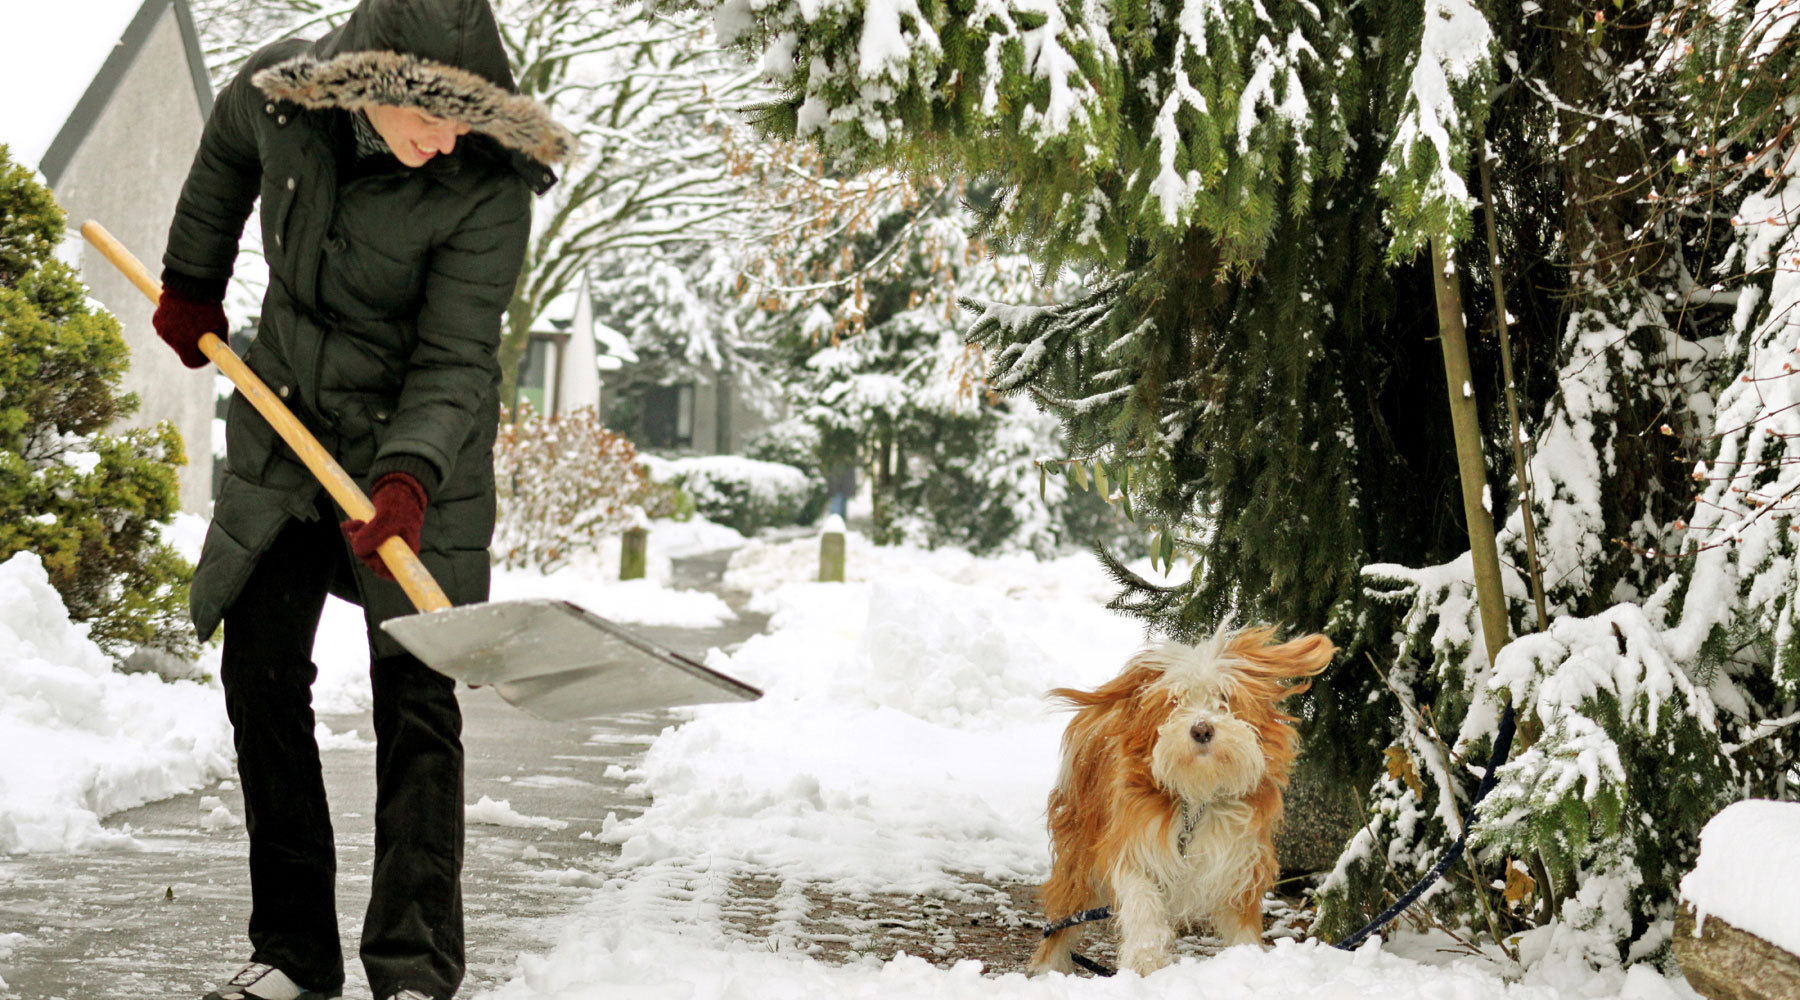 Snow Shoveling Injuries: The Do’s and Don’ts to Effectively Tossing Flakes